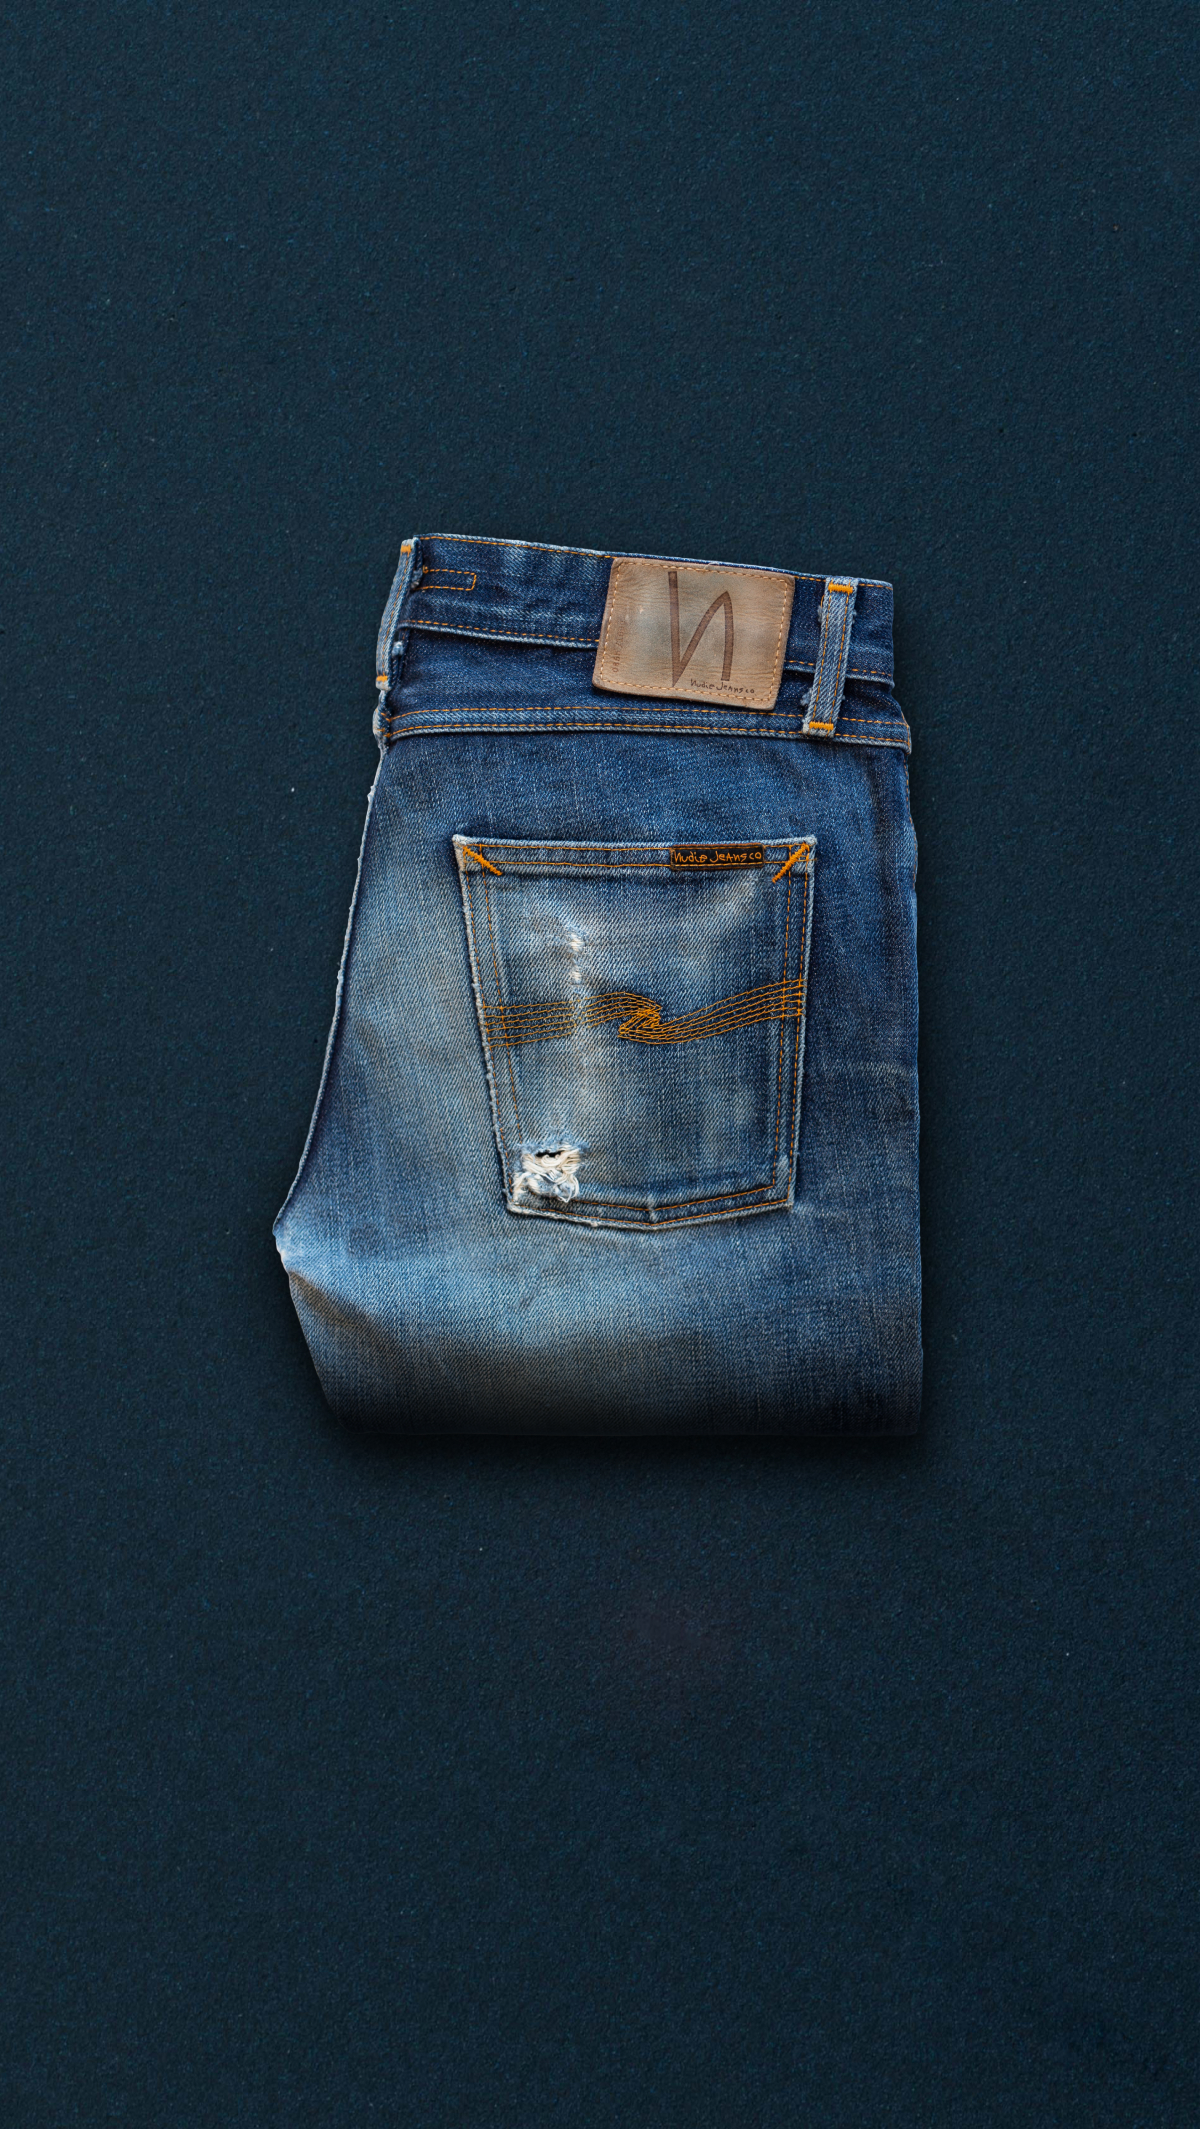 Free Repairs – Nudie Jeans® | 100% Organic Denim Collection Official Site